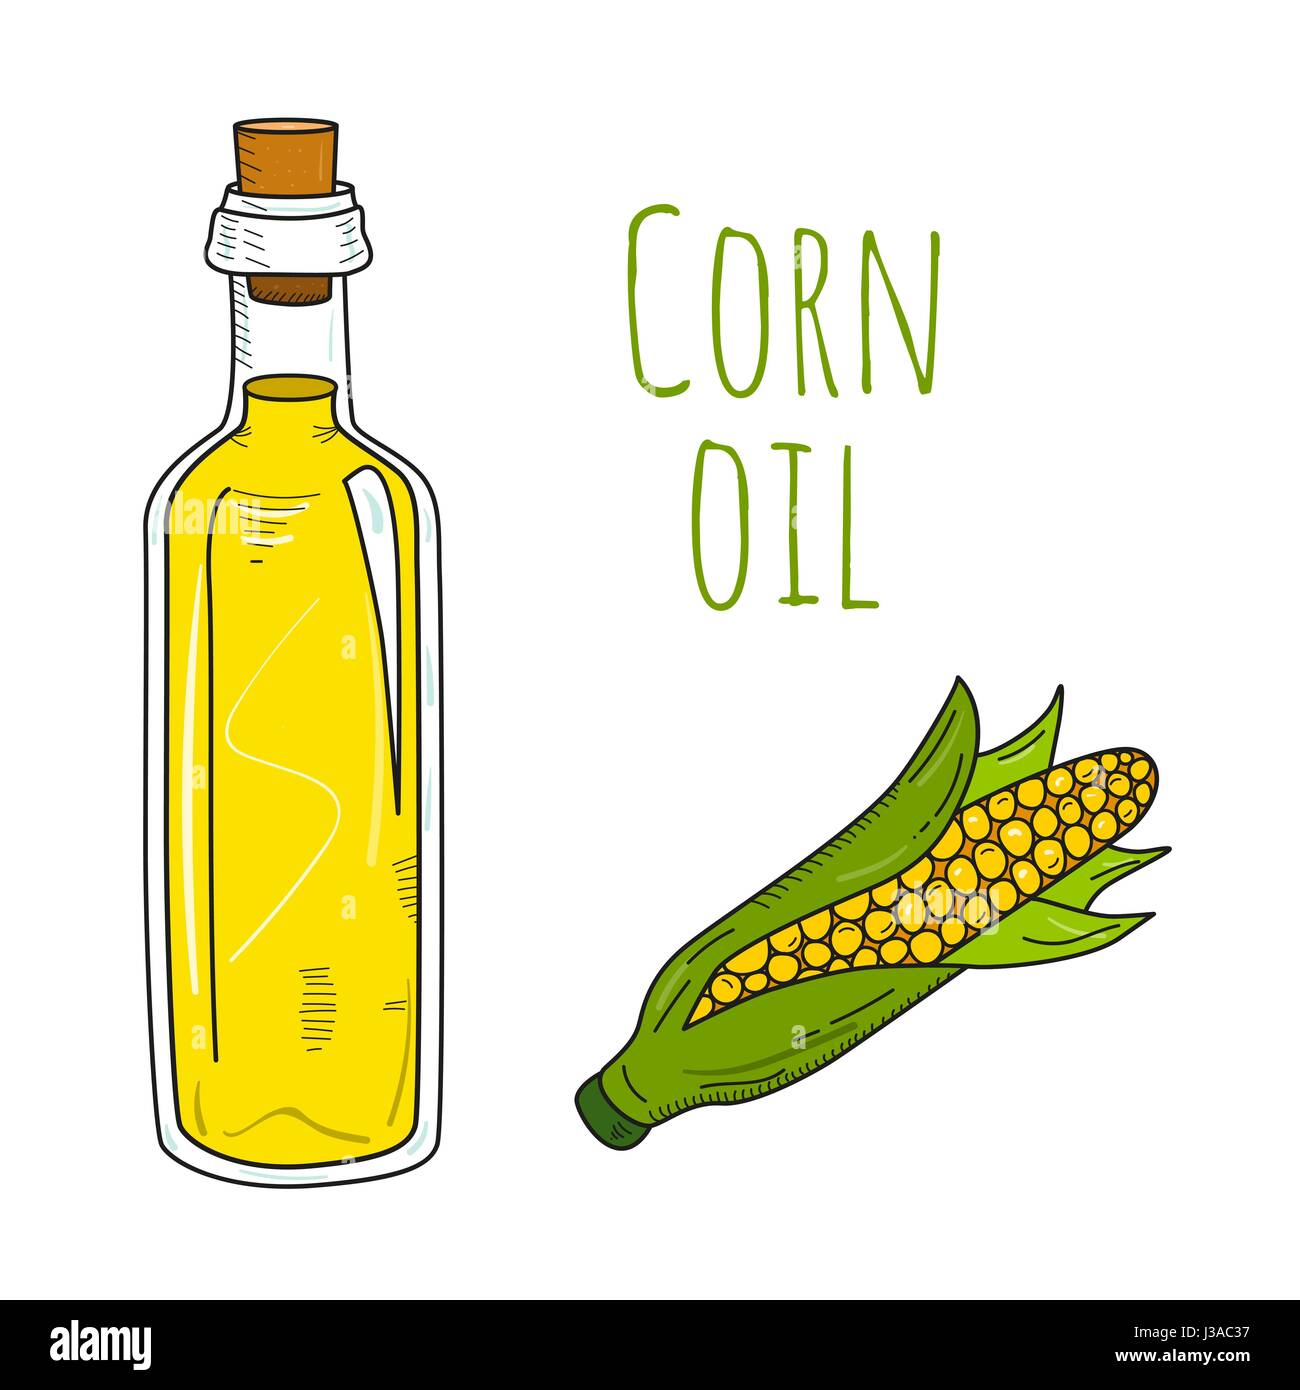 Colorful hand drawn corn oil bottle Stock Vector